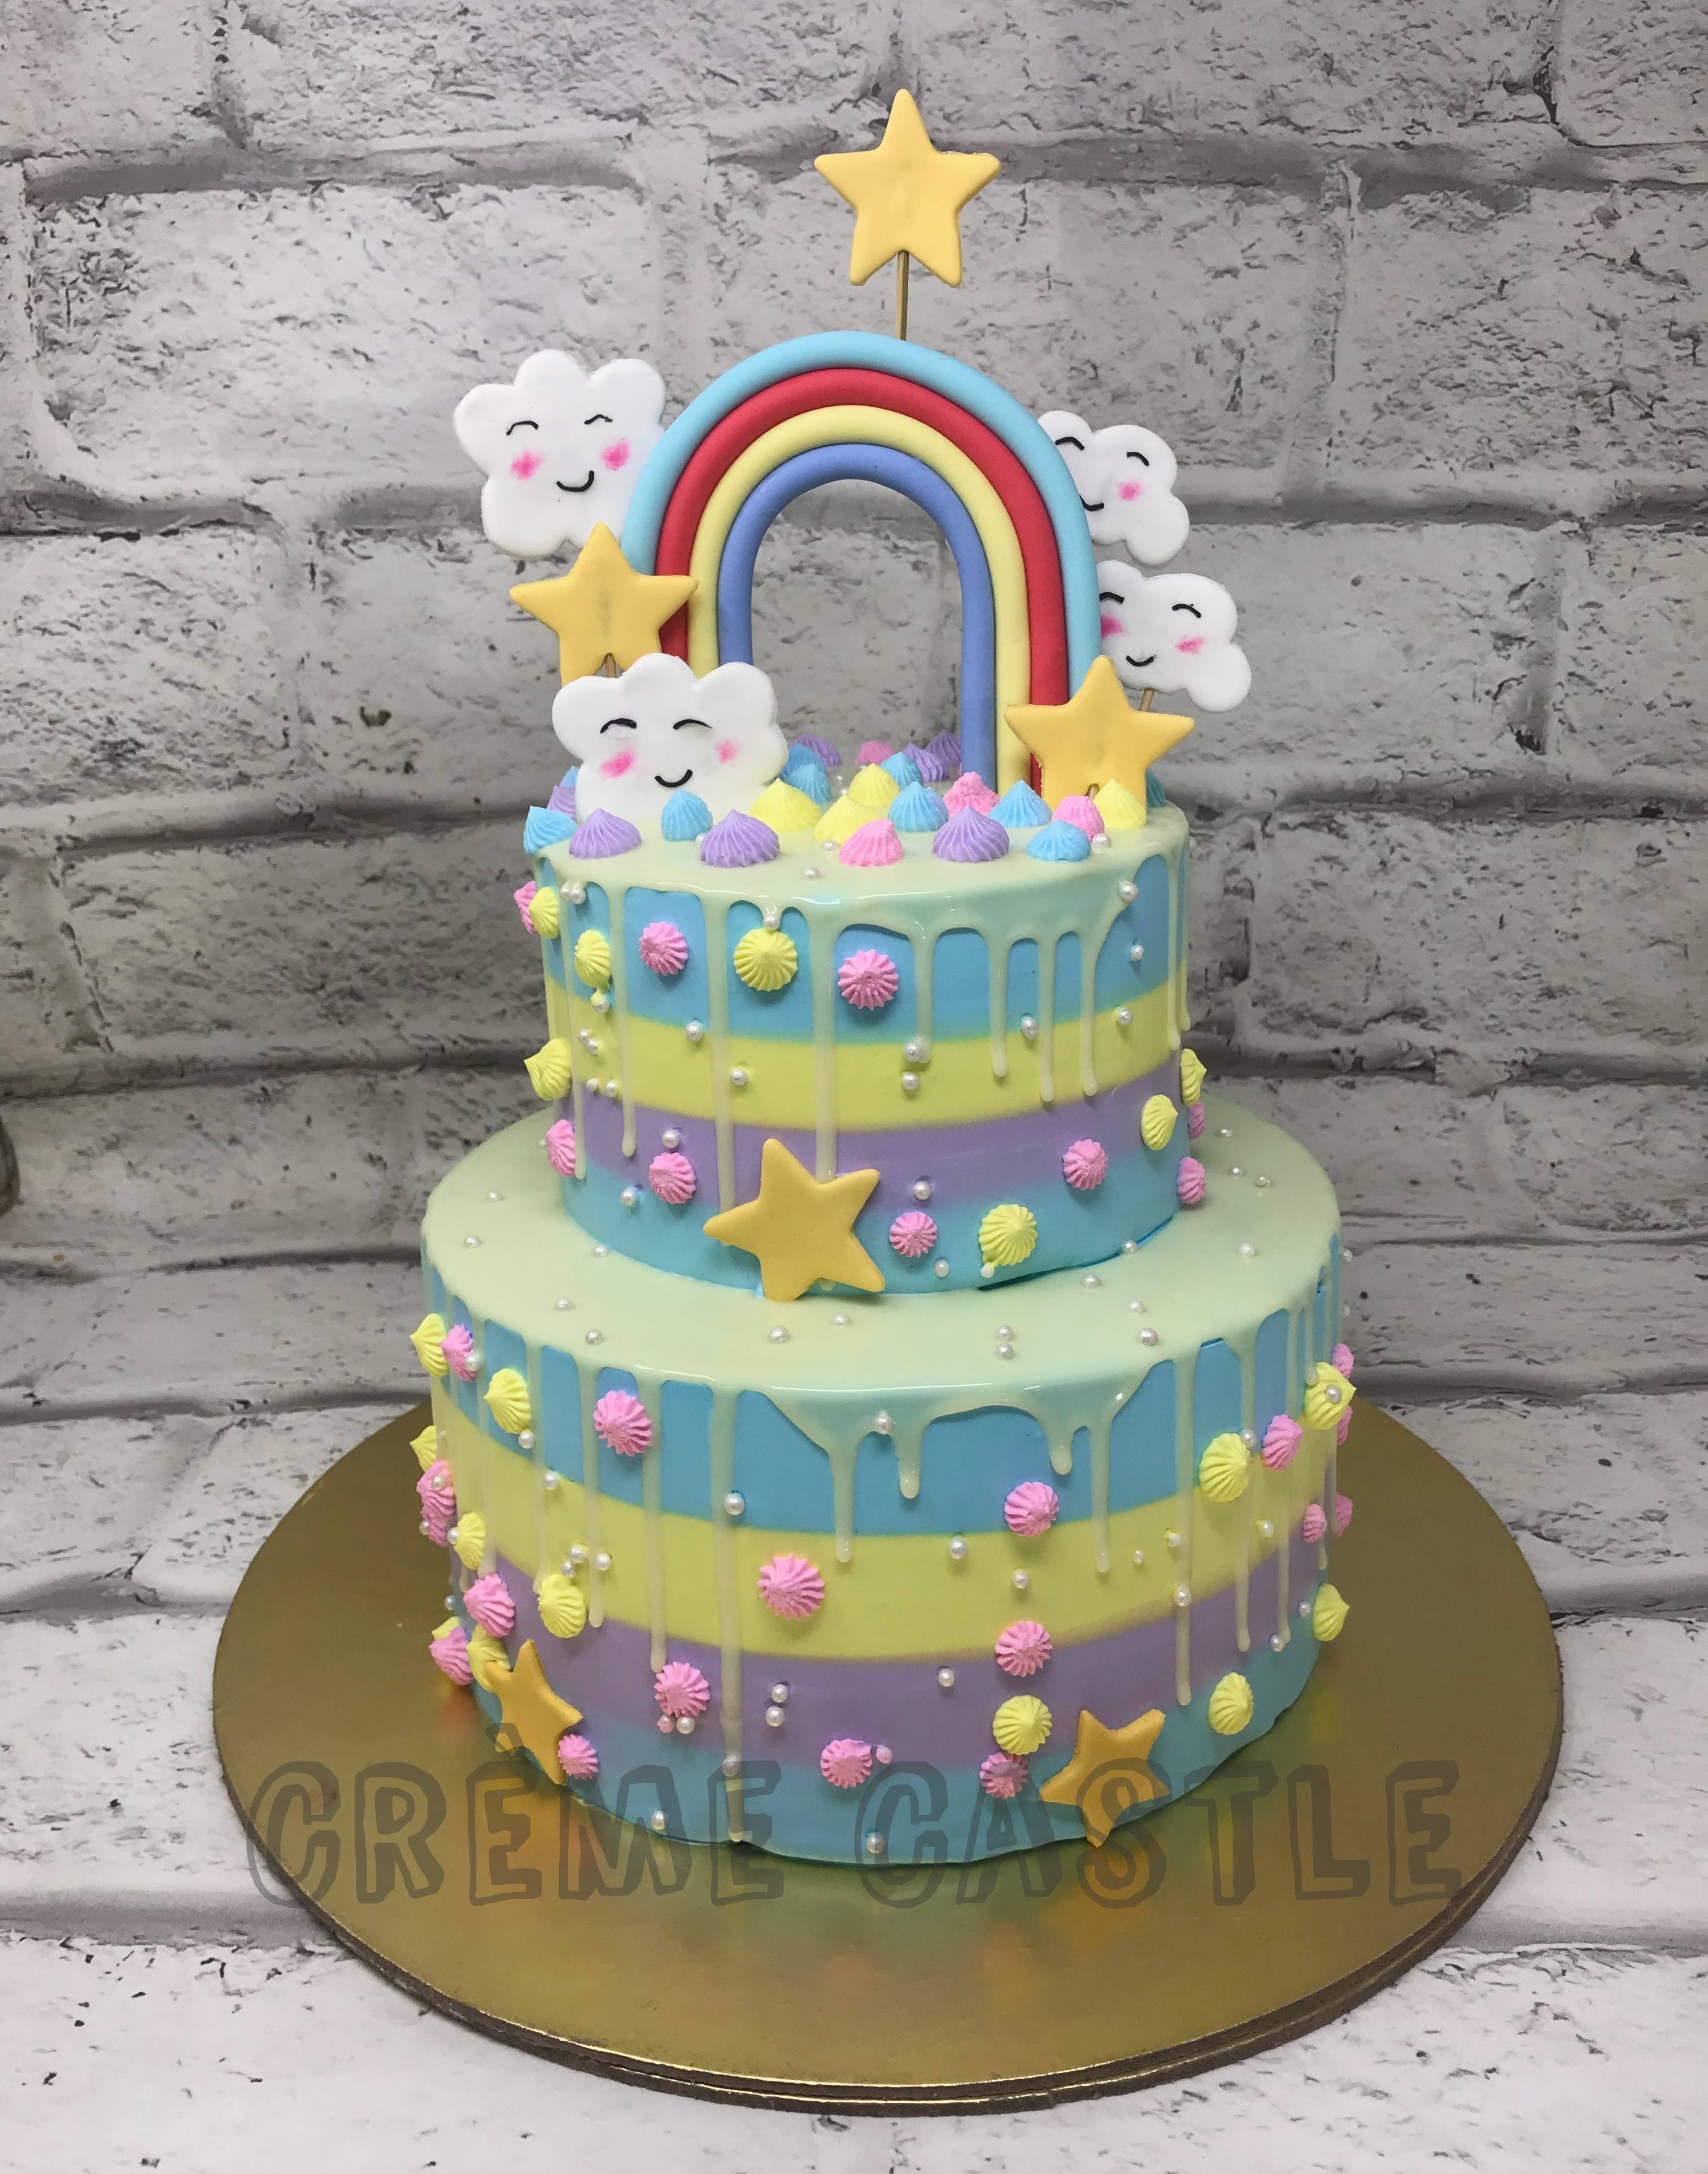 Rainbow Layer Cake with Cream Cheese Frosting